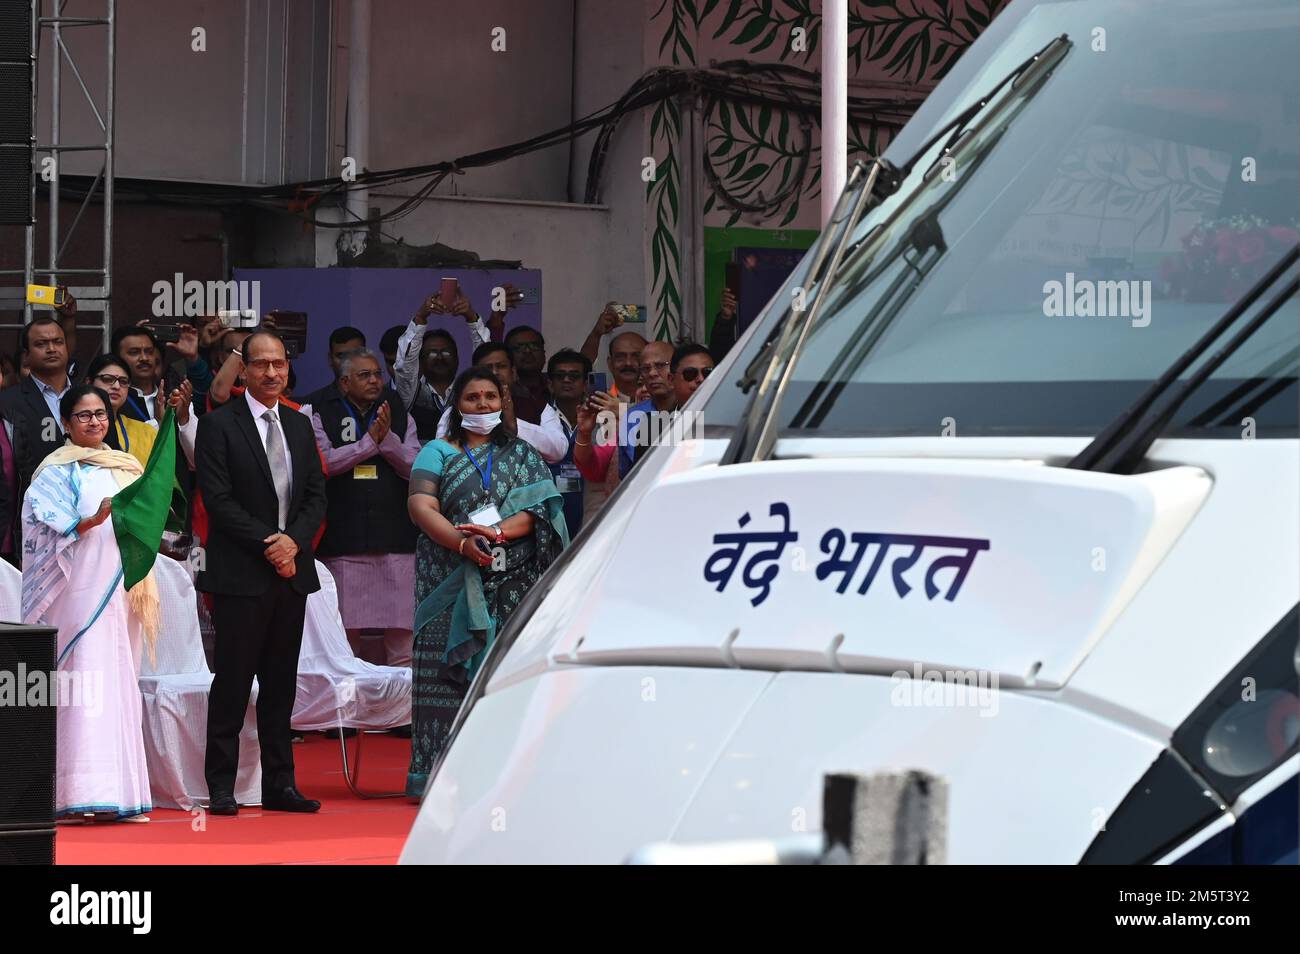 KOLKATA, INDIA - DECEMBER 30: Chief minister Mamata Banerjee refuse to take seat on dias and flags off Vande Bharat Express Train from Howrah to NJP route at Howrah station on December 30, 2022 in Kolkata, India. Soon after performing the last rites of his mother Heeraben in Ahmedabad, Prime Minister Narendra Modi attended pre-planned developmental works including flagging off Vande Bharat Express connecting Howrah to New Jalpaiguri, in West Bengal, via video conferencing. This is West Bengal's first and the country's seventh Vande Bharat train to be launched. (Photo by Samir Jana/Hindustan Ti Stock Photo